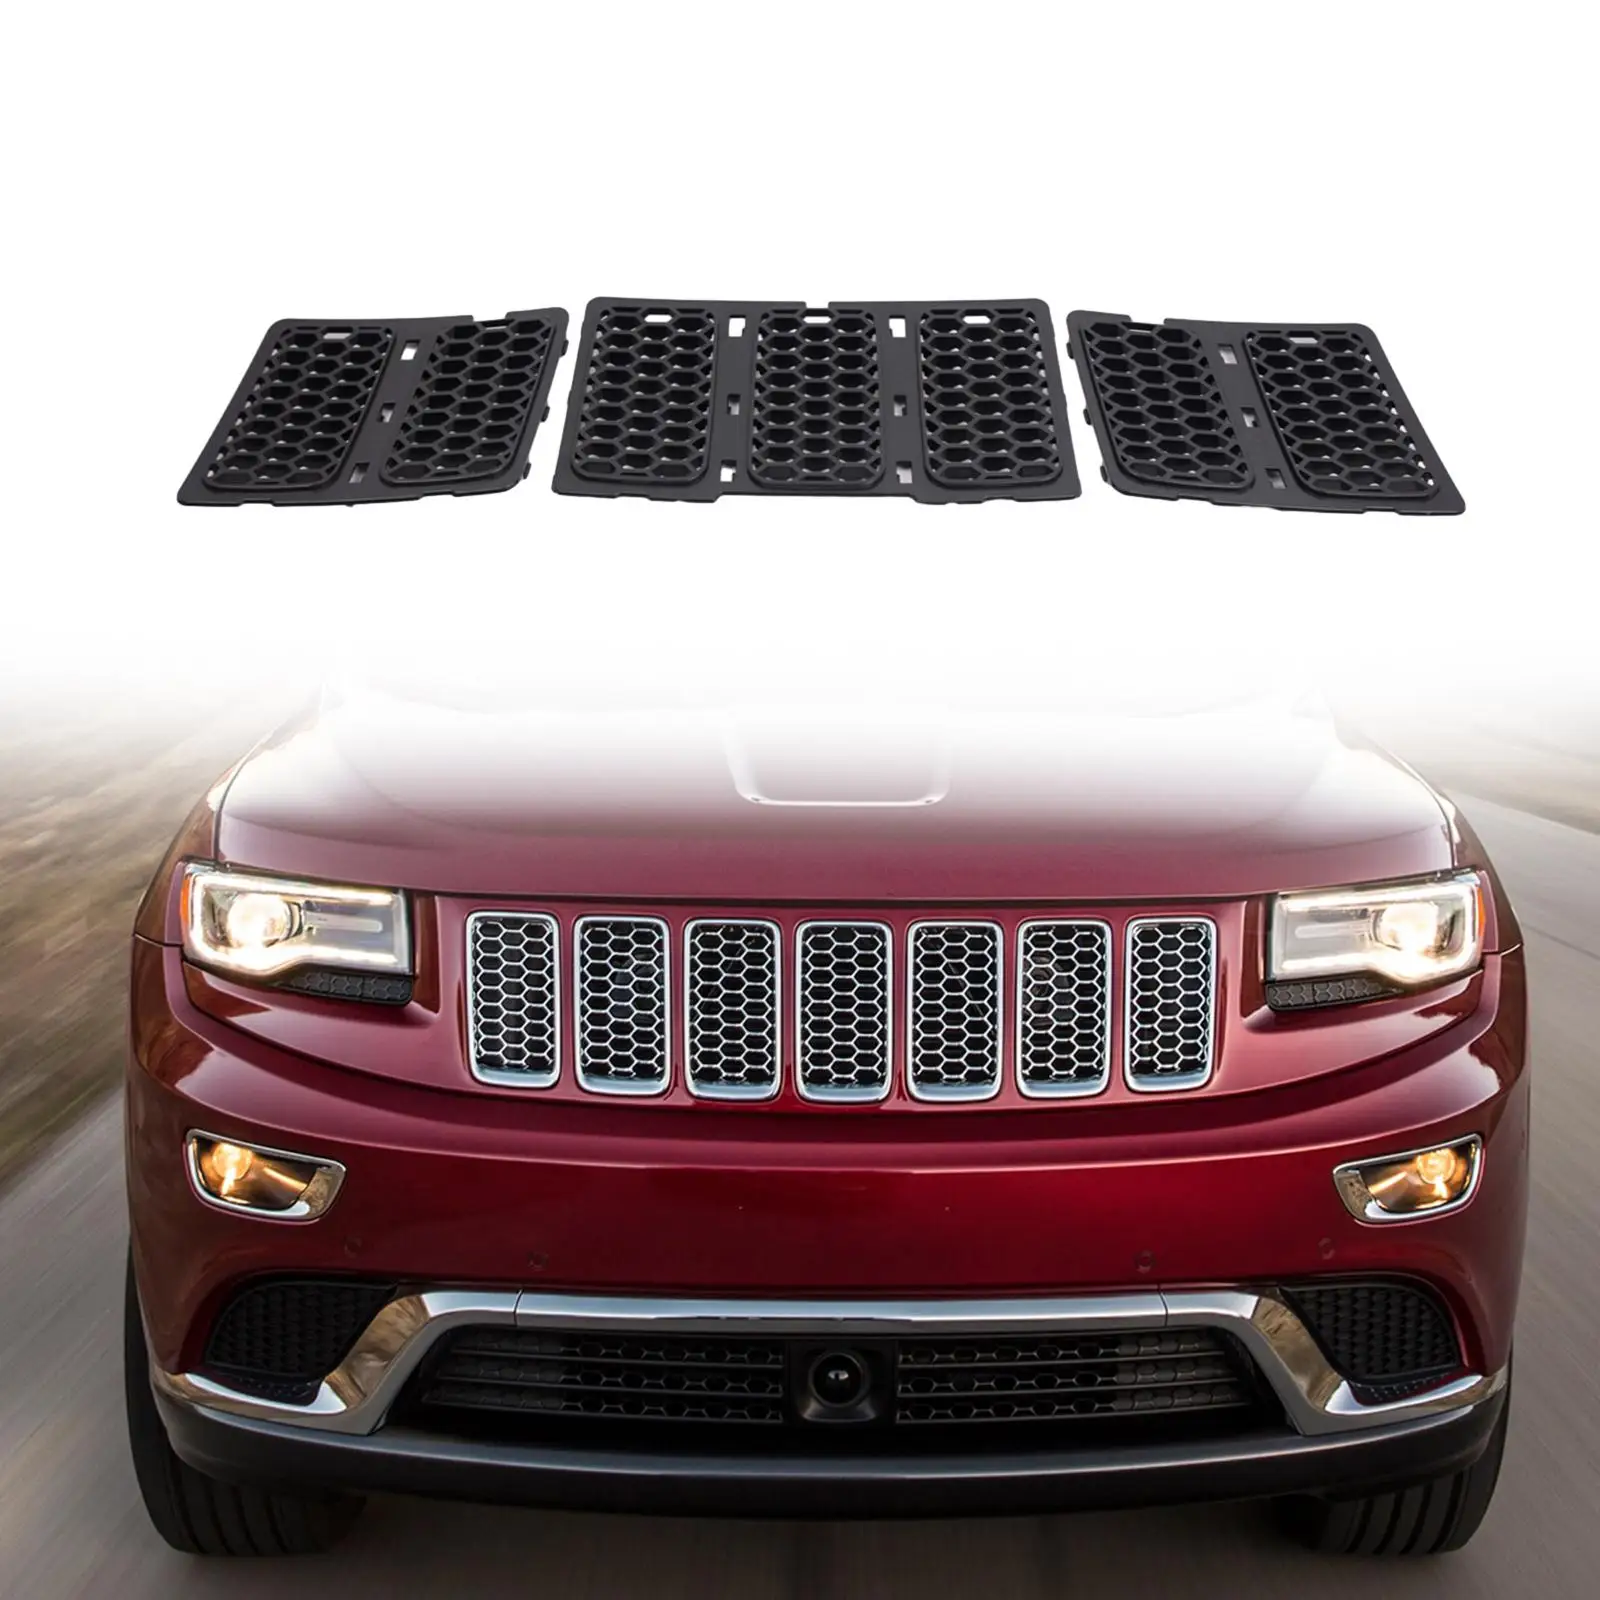 3x Honeycomb Grille Inserts Easy Installation 68143073AC 68143074AD Black High Quality Replacement Parts Auto Accessory